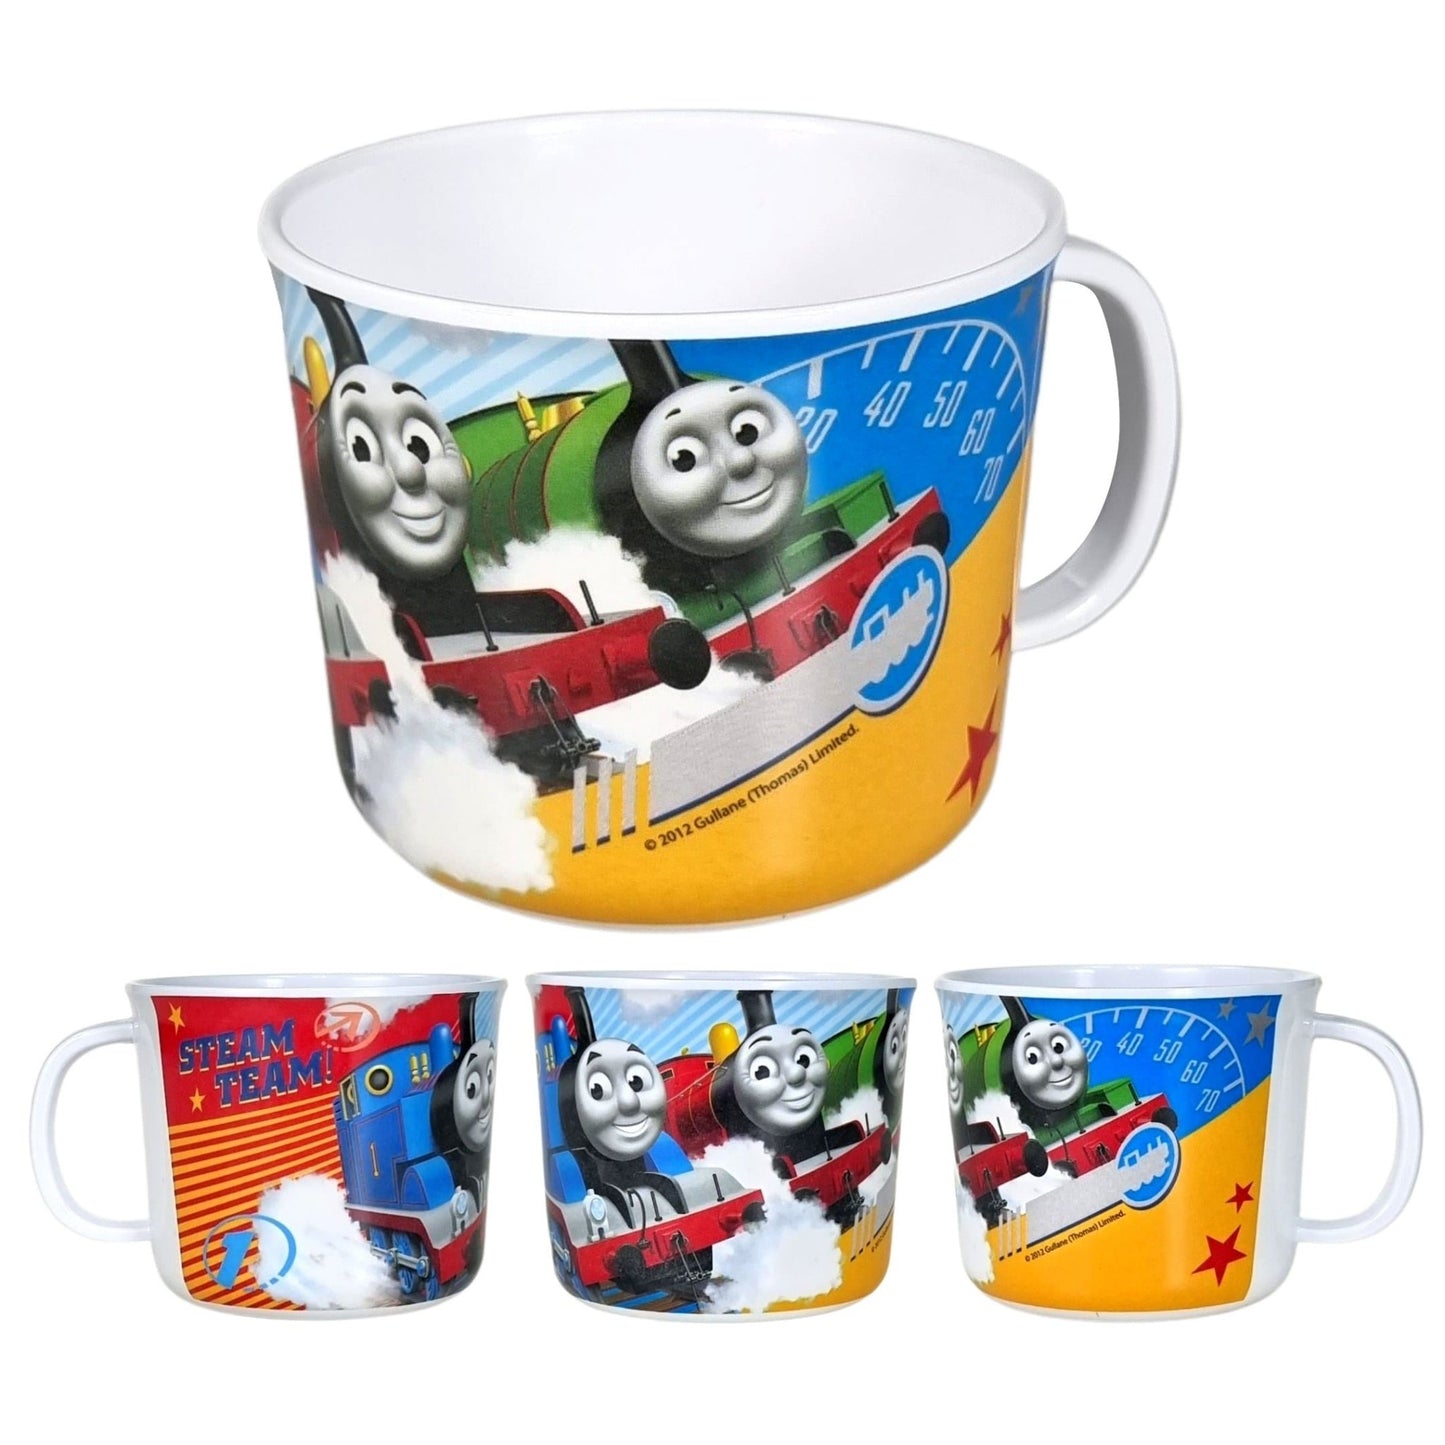 Thomas & Friends - Tableware, Bowl | Plate | Cup | Spoon | Fork (Steam Train Collection) - Simply Life